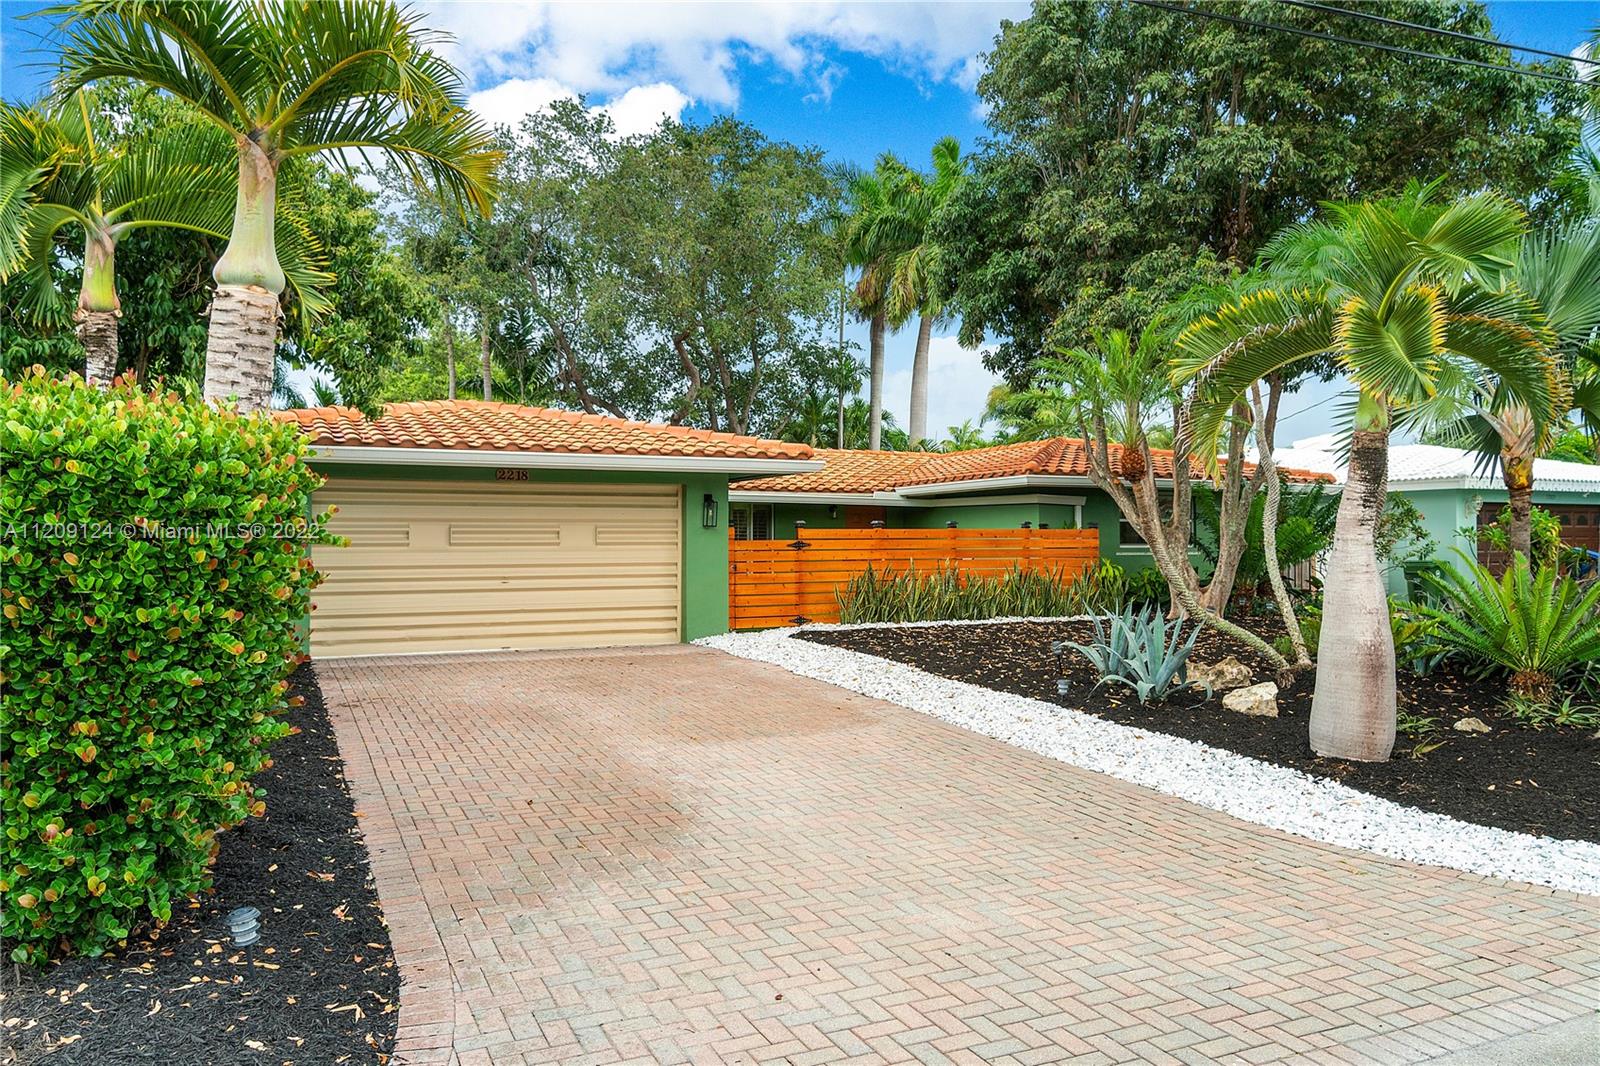 Buyers benefit from new price sellers relocating!! Property appraised May 2022. Sellers asking for full price offers only Wilton Manors renovated & well cared for 3/2.5 home + office. Boasting over 2200 sq ft, this home has a new tankless water heater (2021), new 5-ton HVAC (2021), new LVP throughout the home (2021), enclosed front courtyard, new chef’s kitchen with an entertainer’s dream island (2021), propane piping throughout, all new appliances incl. a Thermador propane cooktop, top of the line LG Thin Q, & Kitchen Aid dishwasher No expense spared on this chef’s kitchen. Walk to the neighborhood Starbucks, Eucalyptus Gardens or local restaurants. Within a 5 min drive to Whole Foods, Trader Joe’s, Fresh Market & several Publix locations.  (2264sf per seller with additions by permit)